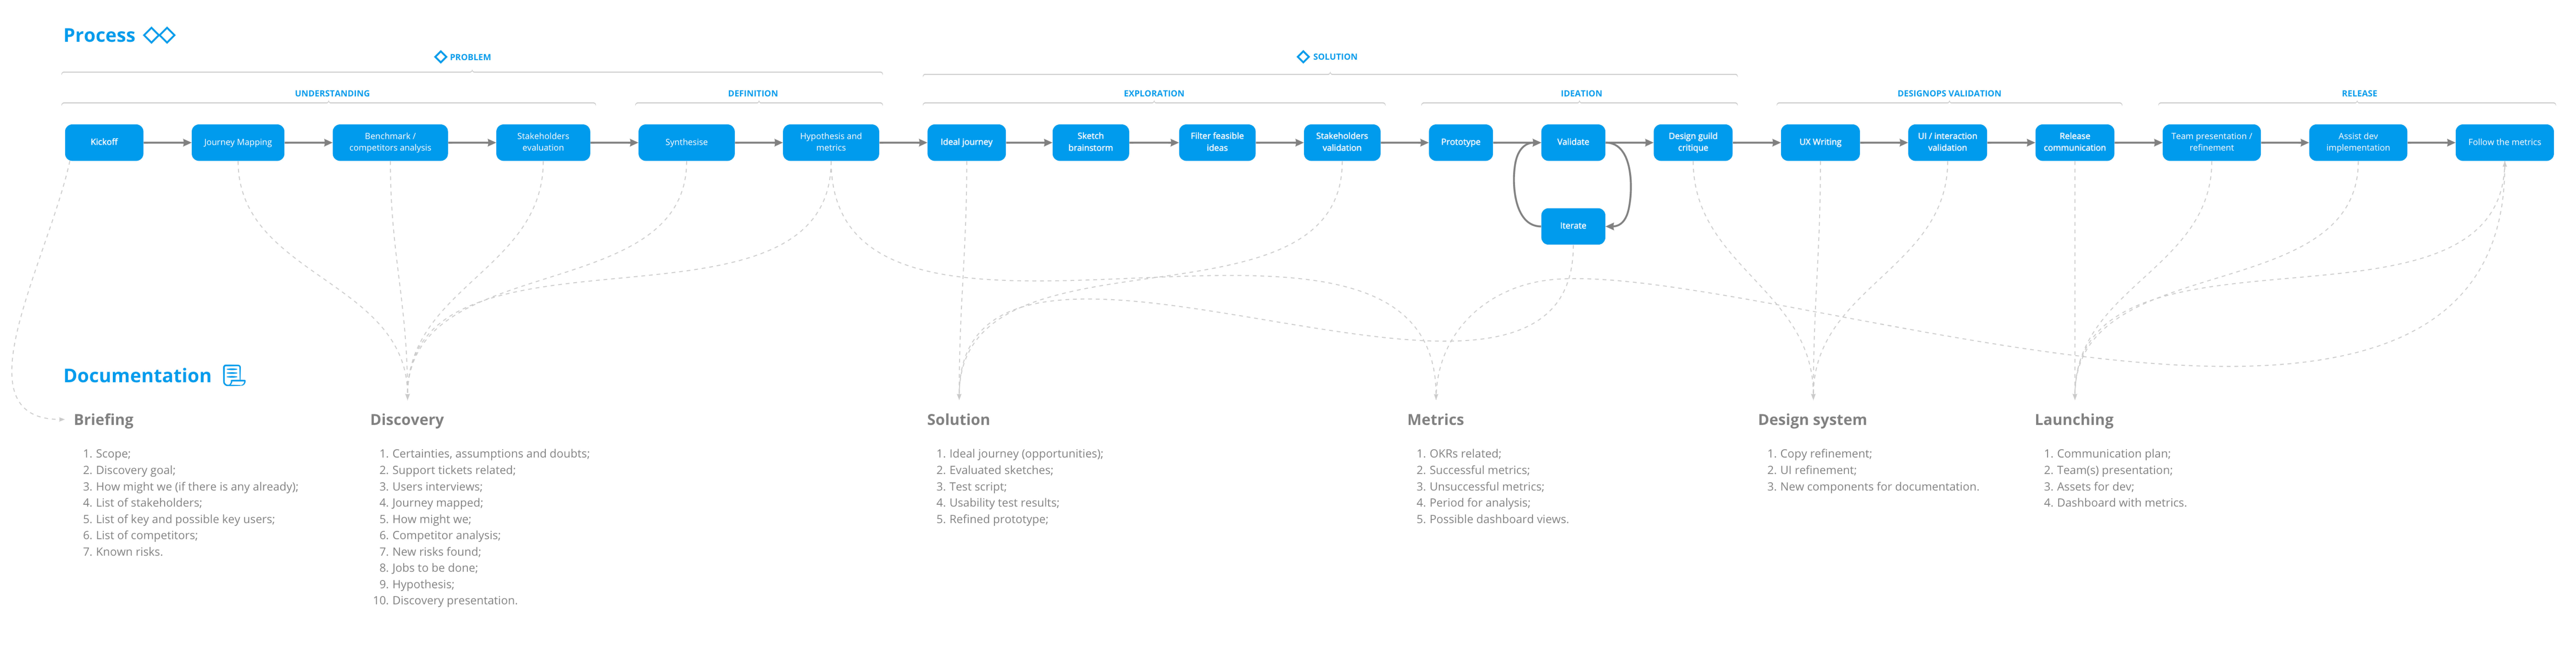 Design process mapping with steps outcome and clustering.